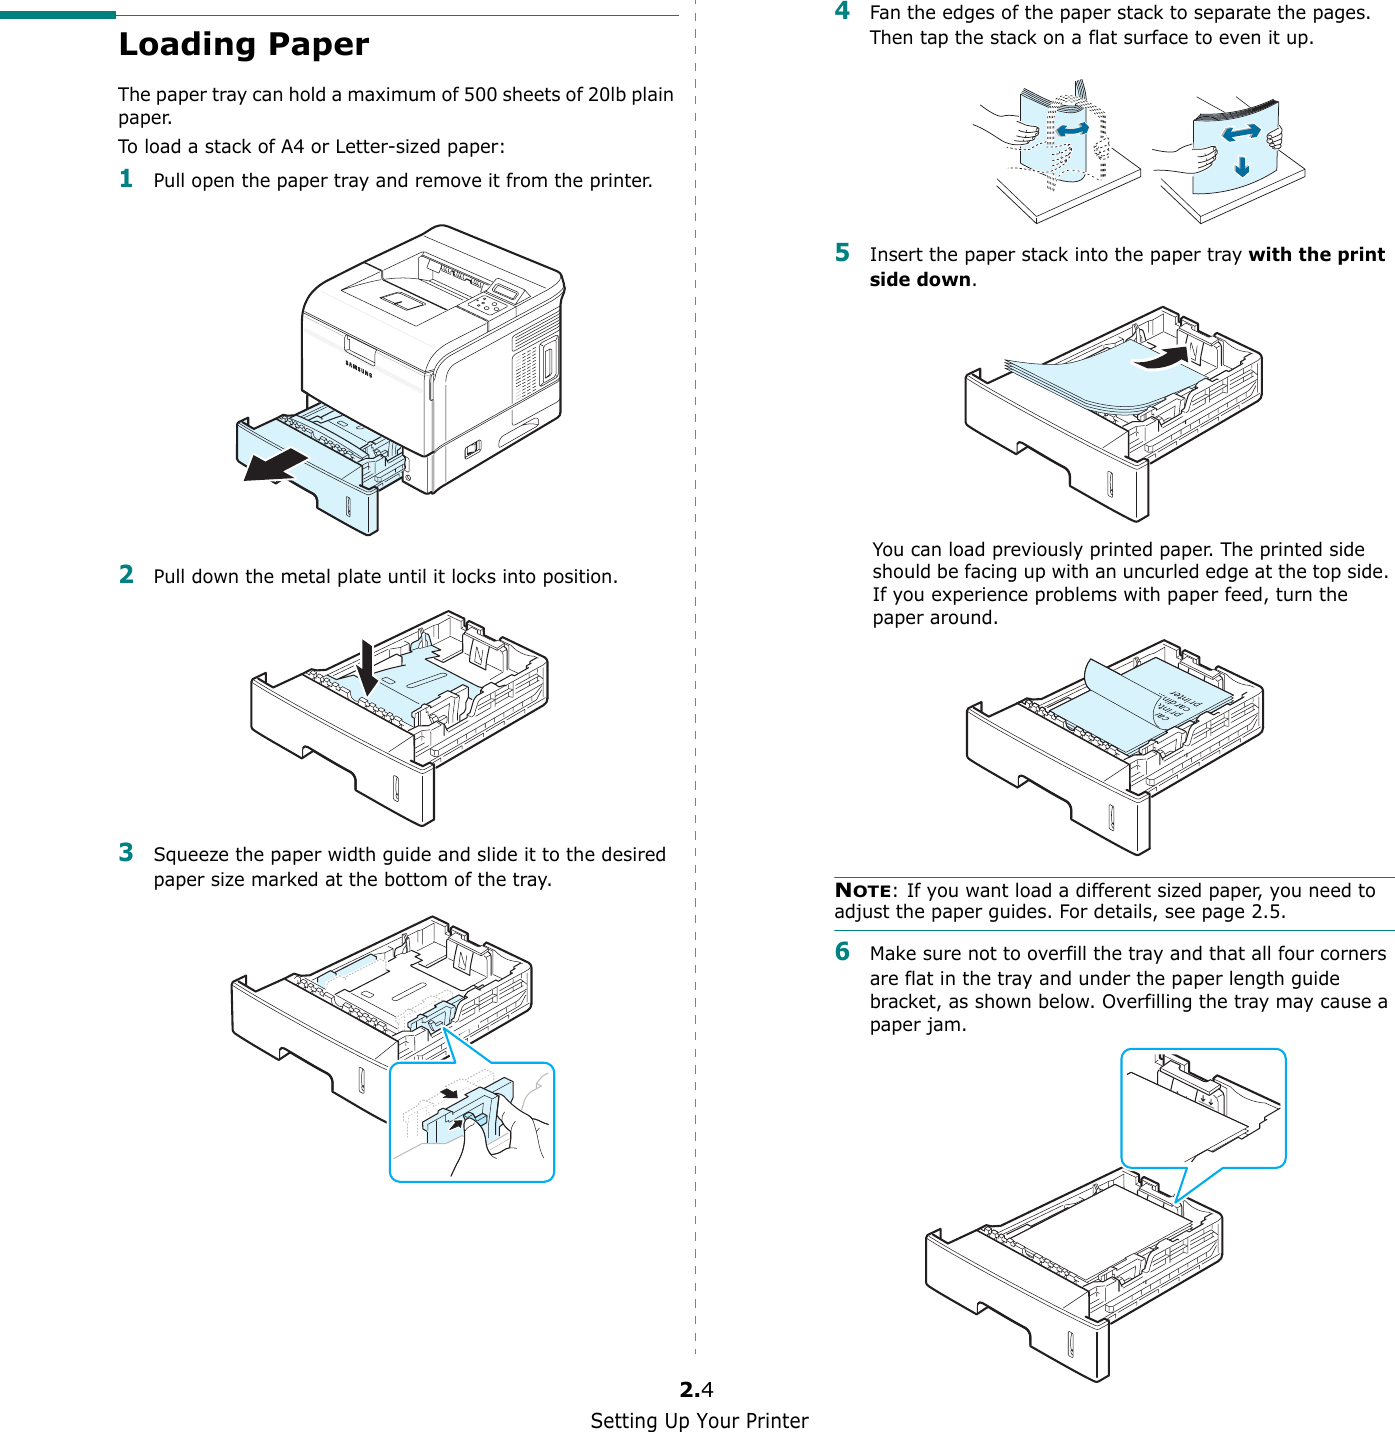 Setting Up Your Printer2.4Loading PaperThe paper tray can hold a maximum of 500 sheets of 20lb plain paper. To load a stack of A4 or Letter-sized paper:1Pull open the paper tray and remove it from the printer.2Pull down the metal plate until it locks into position.3Squeeze the paper width guide and slide it to the desired paper size marked at the bottom of the tray.4Fan the edges of the paper stack to separate the pages. Then tap the stack on a flat surface to even it up.5Insert the paper stack into the paper tray with the print side down. You can load previously printed paper. The printed side should be facing up with an uncurled edge at the top side. If you experience problems with paper feed, turn the paper around. NOTE: If you want load a different sized paper, you need to adjust the paper guides. For details, see page 2.5.6Make sure not to overfill the tray and that all four corners are flat in the tray and under the paper length guide  bracket, as shown below. Overfilling the tray may cause a paper jam.